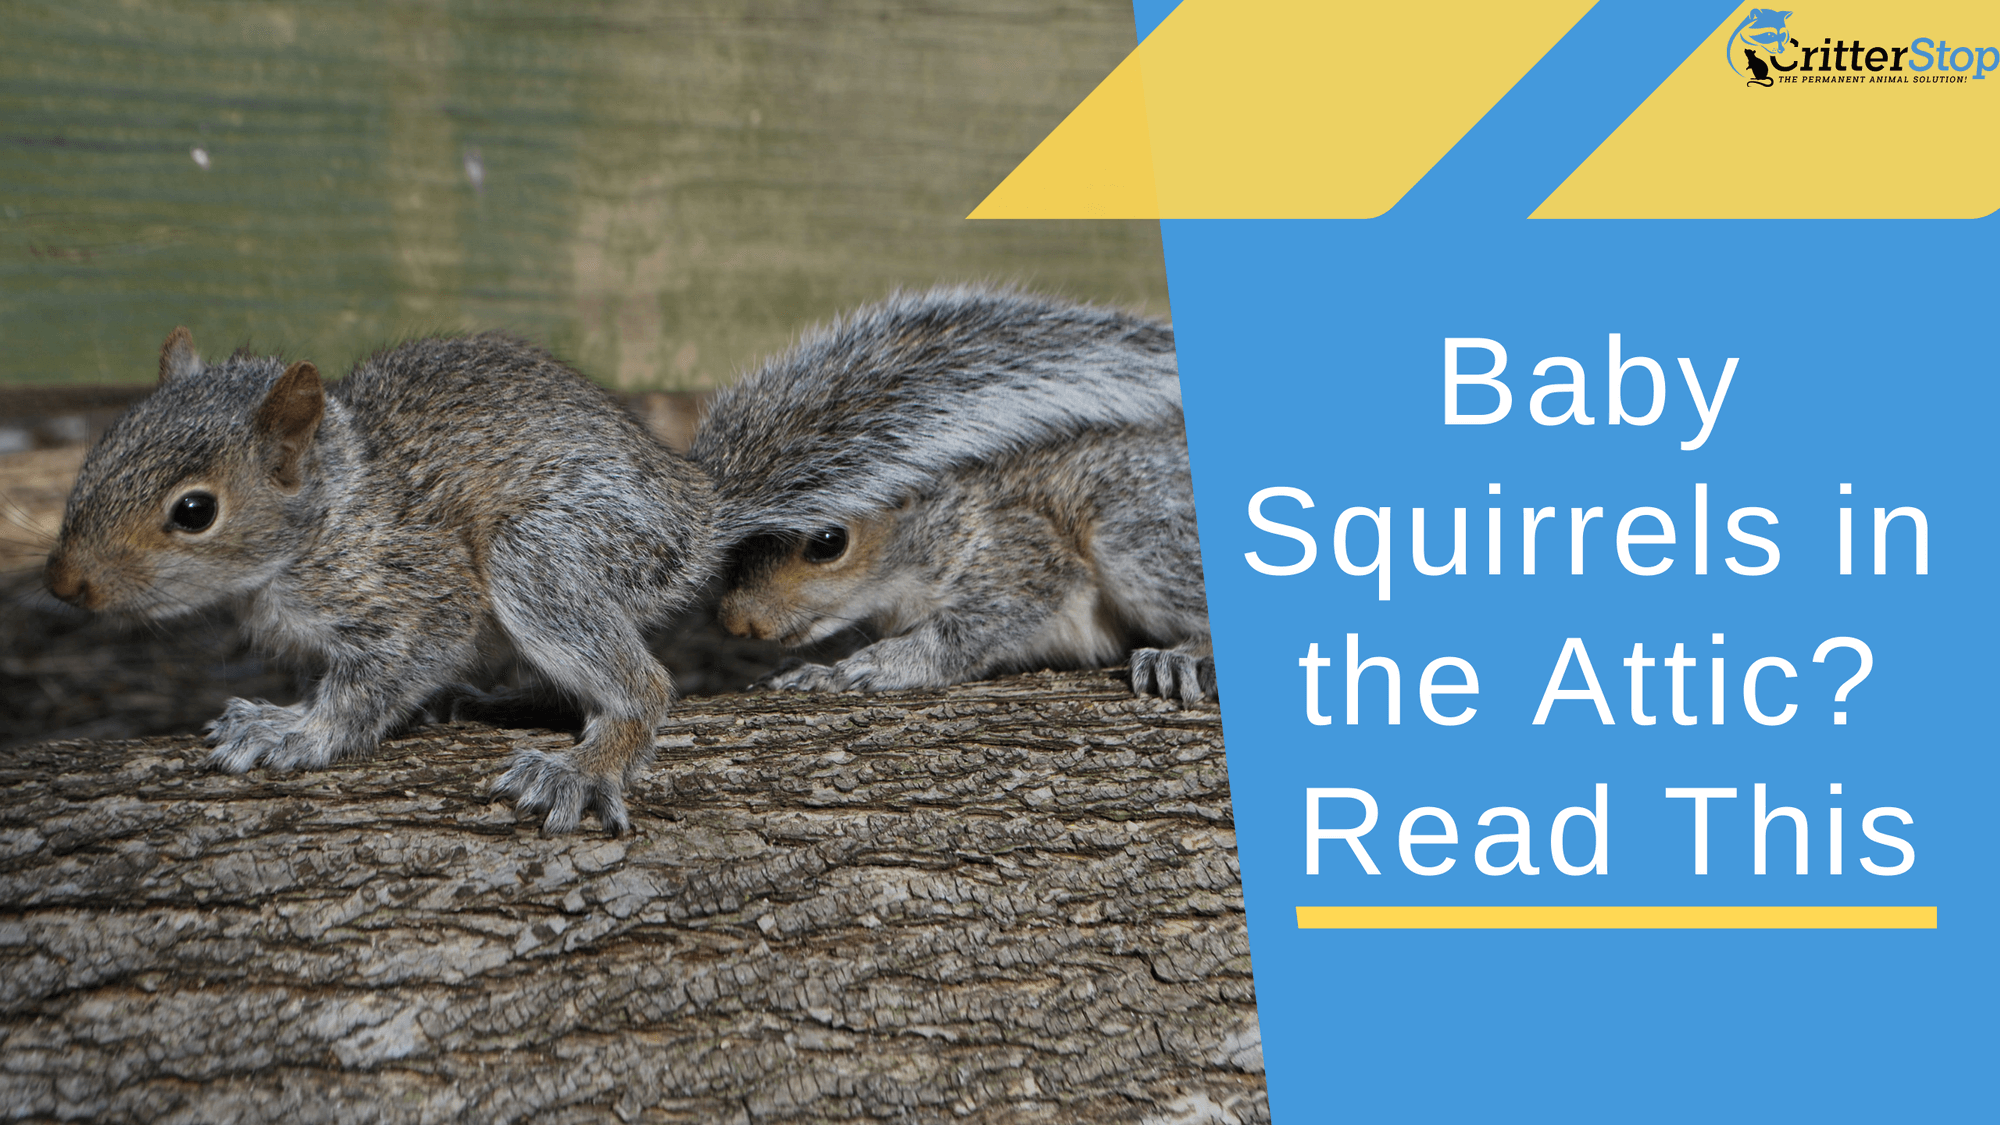 Baby Squirrels in the Attic? Read This!